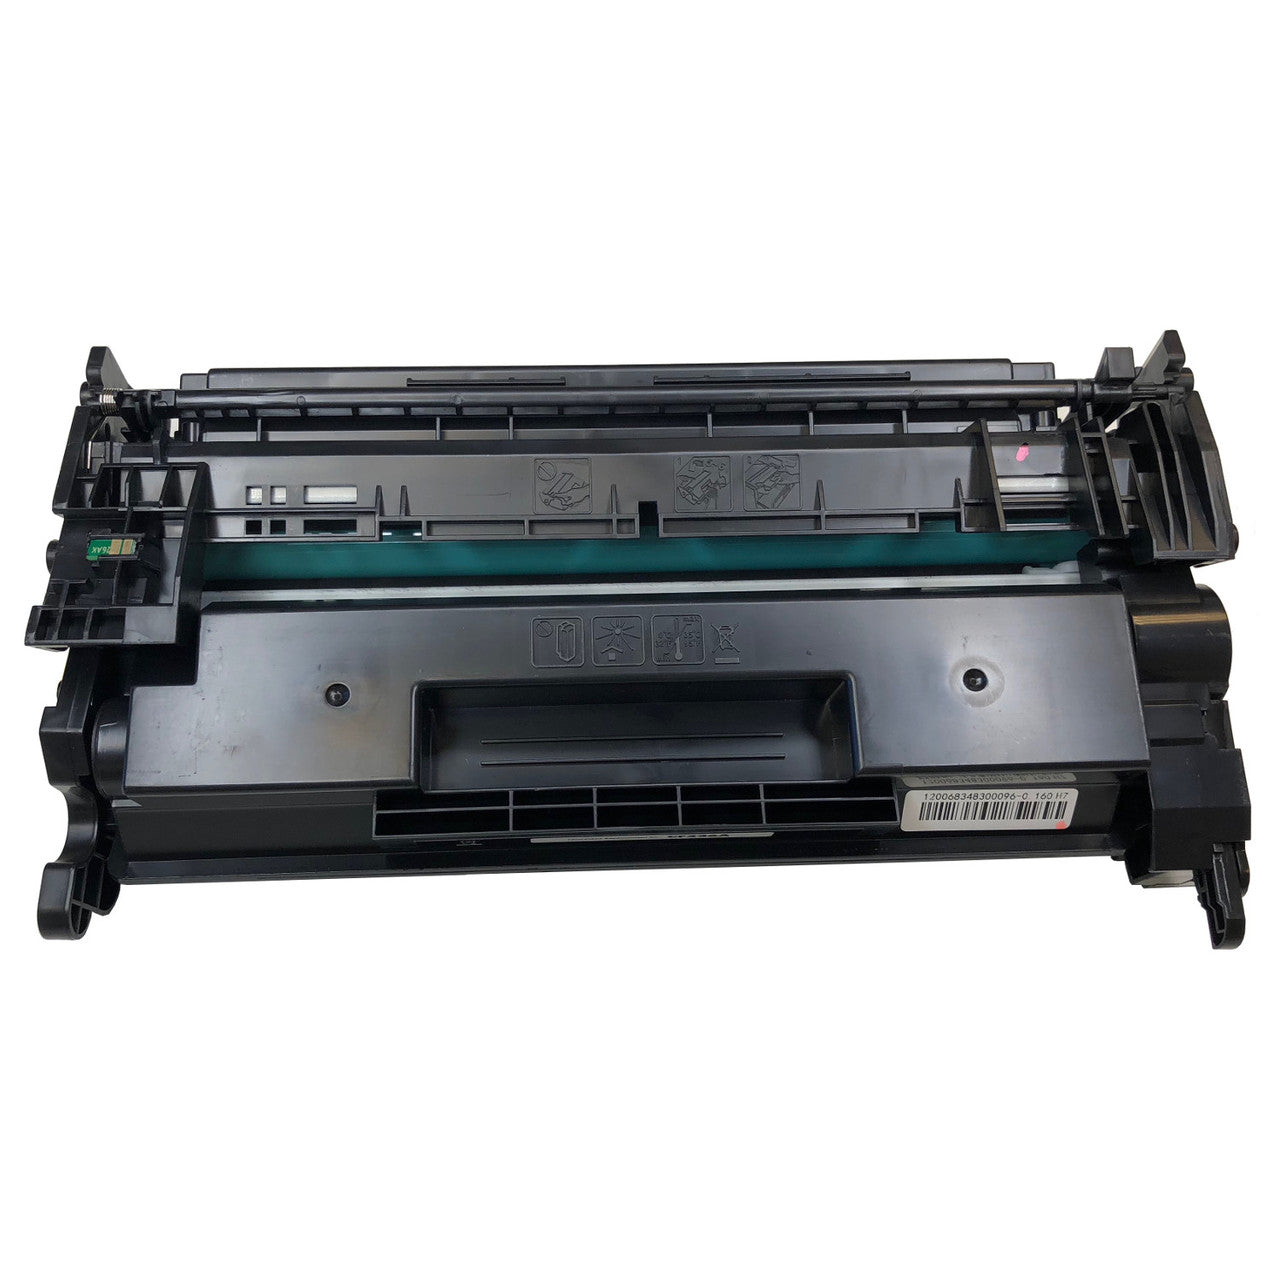 Print.Save.Repeat. HP 26X High Yield Compatible Toner Cartridge (CF226X) for LaserJet Pro M402, M426 [9,000 Pages]